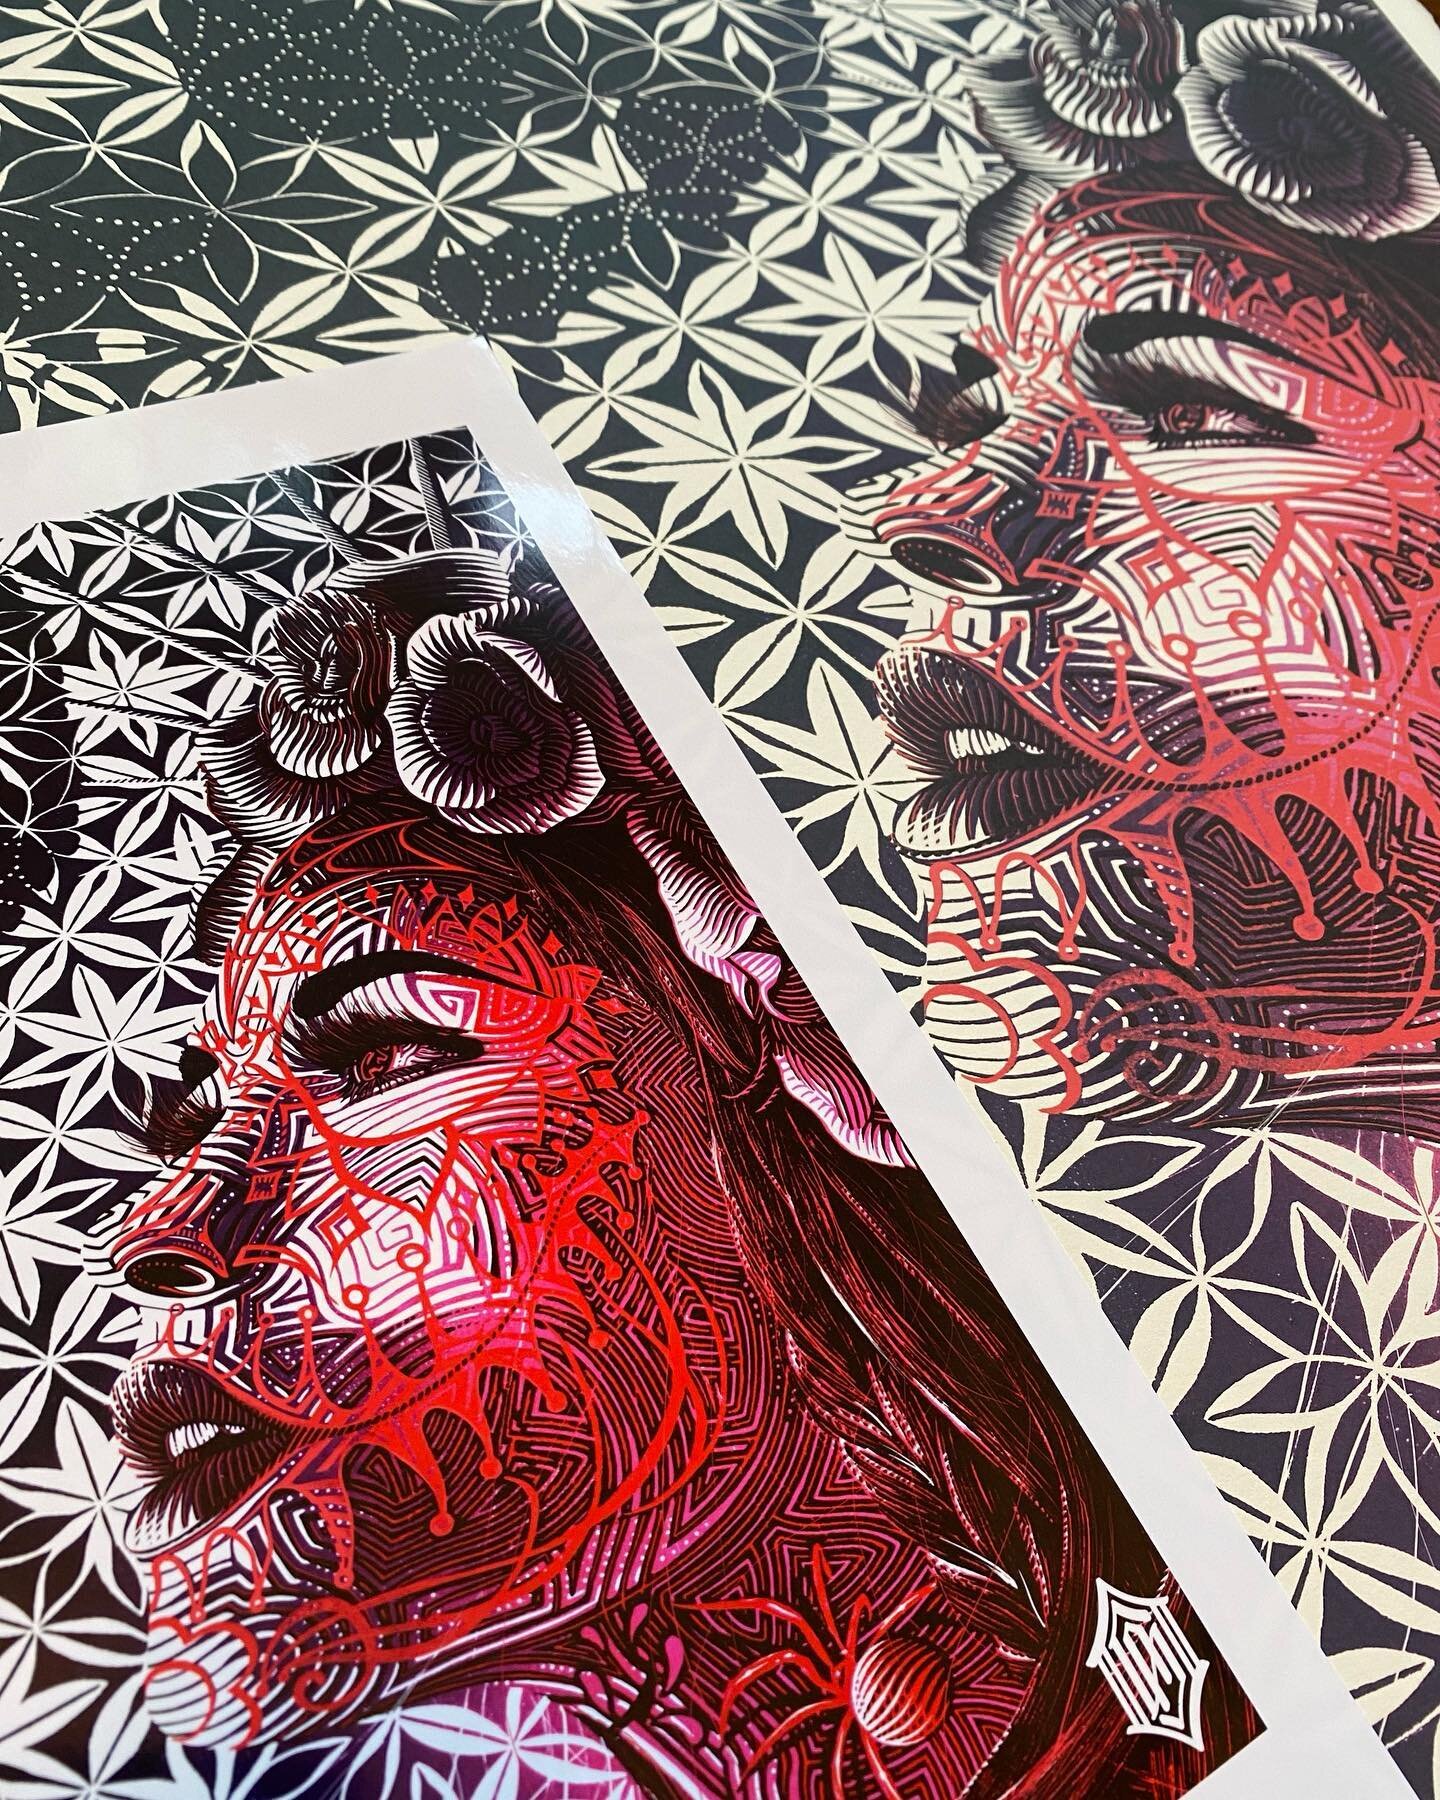 New gicl&eacute;e prints! These high definition prints will be available for purchase on Thursday. You can now own a high quality reproduction of my woodcuts at a fraction of the price. These will all be available in three standard sizes and you can 